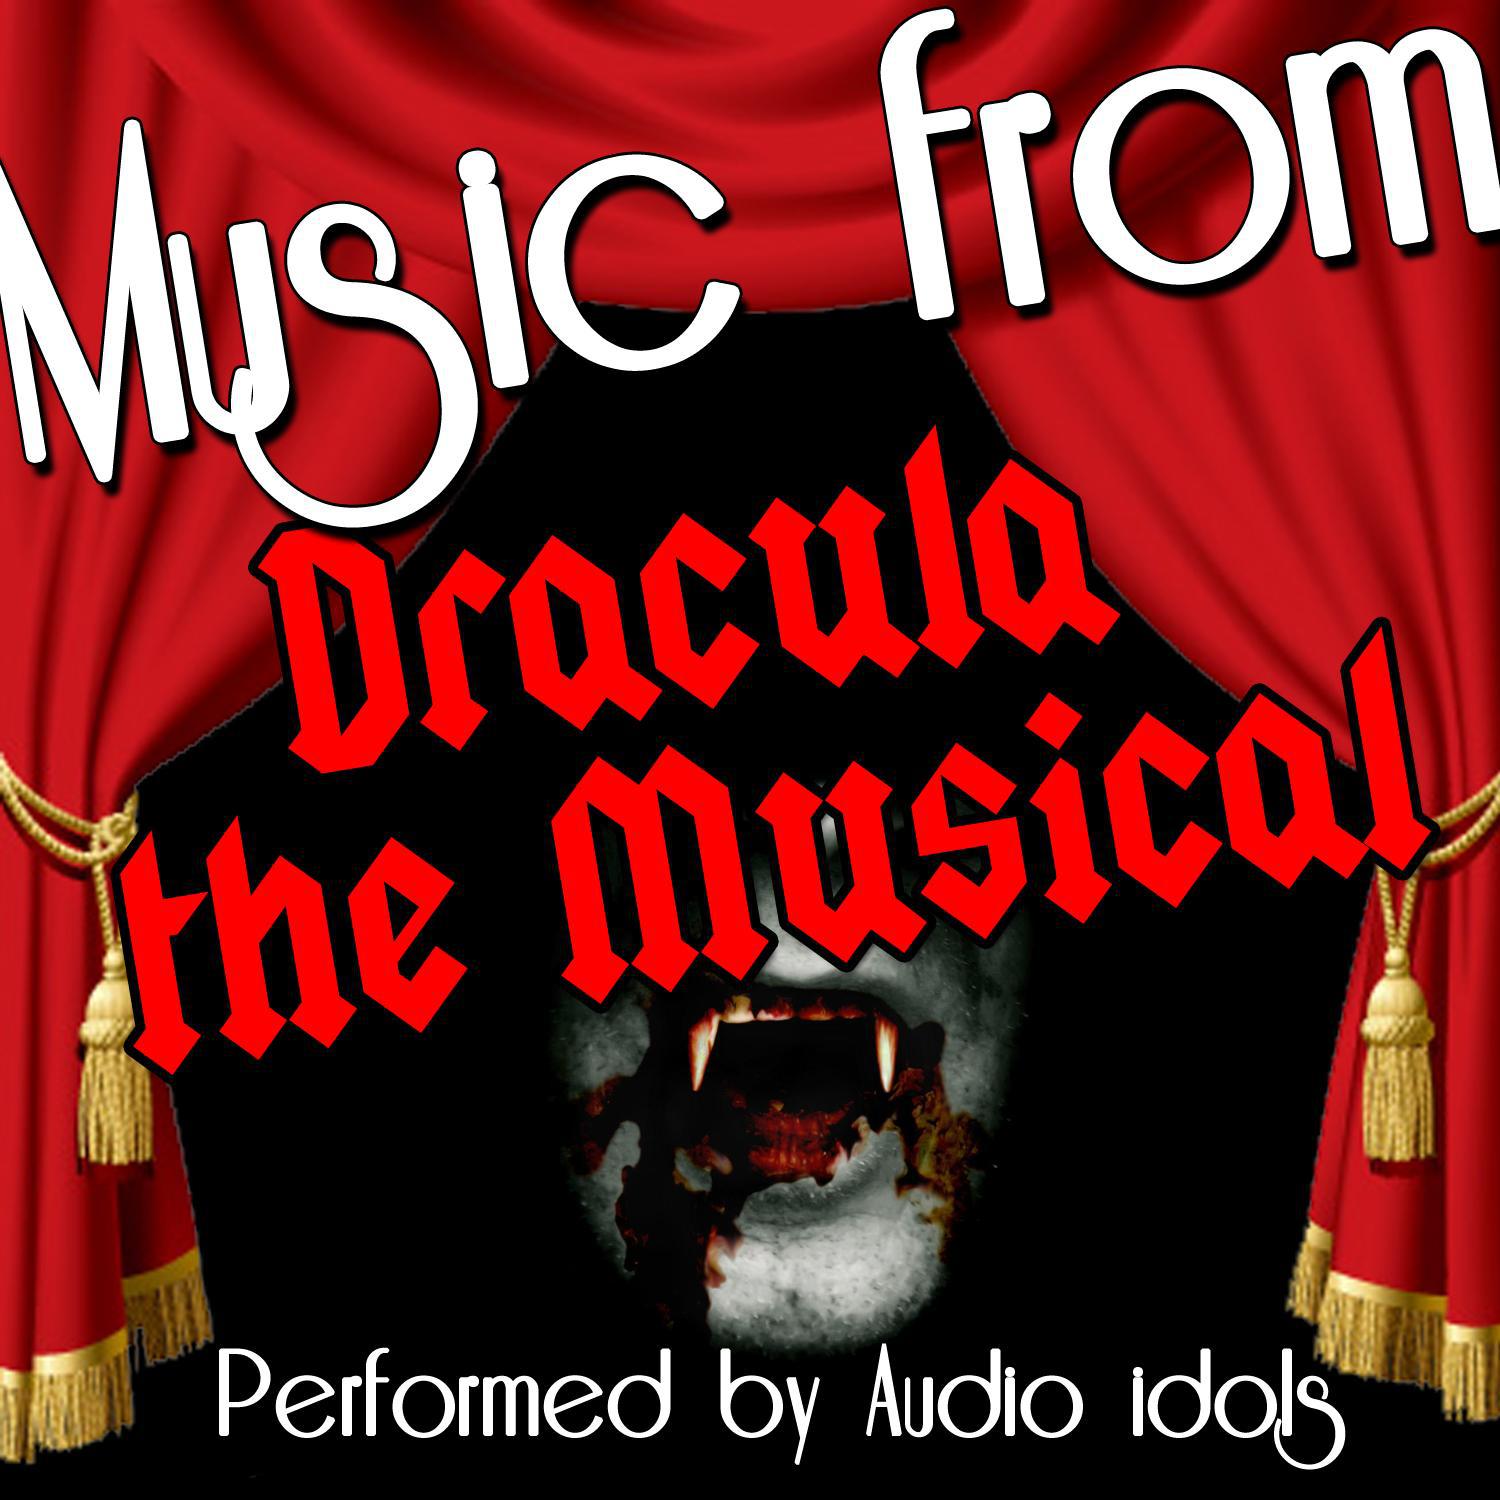 Music from Dracula the Musical